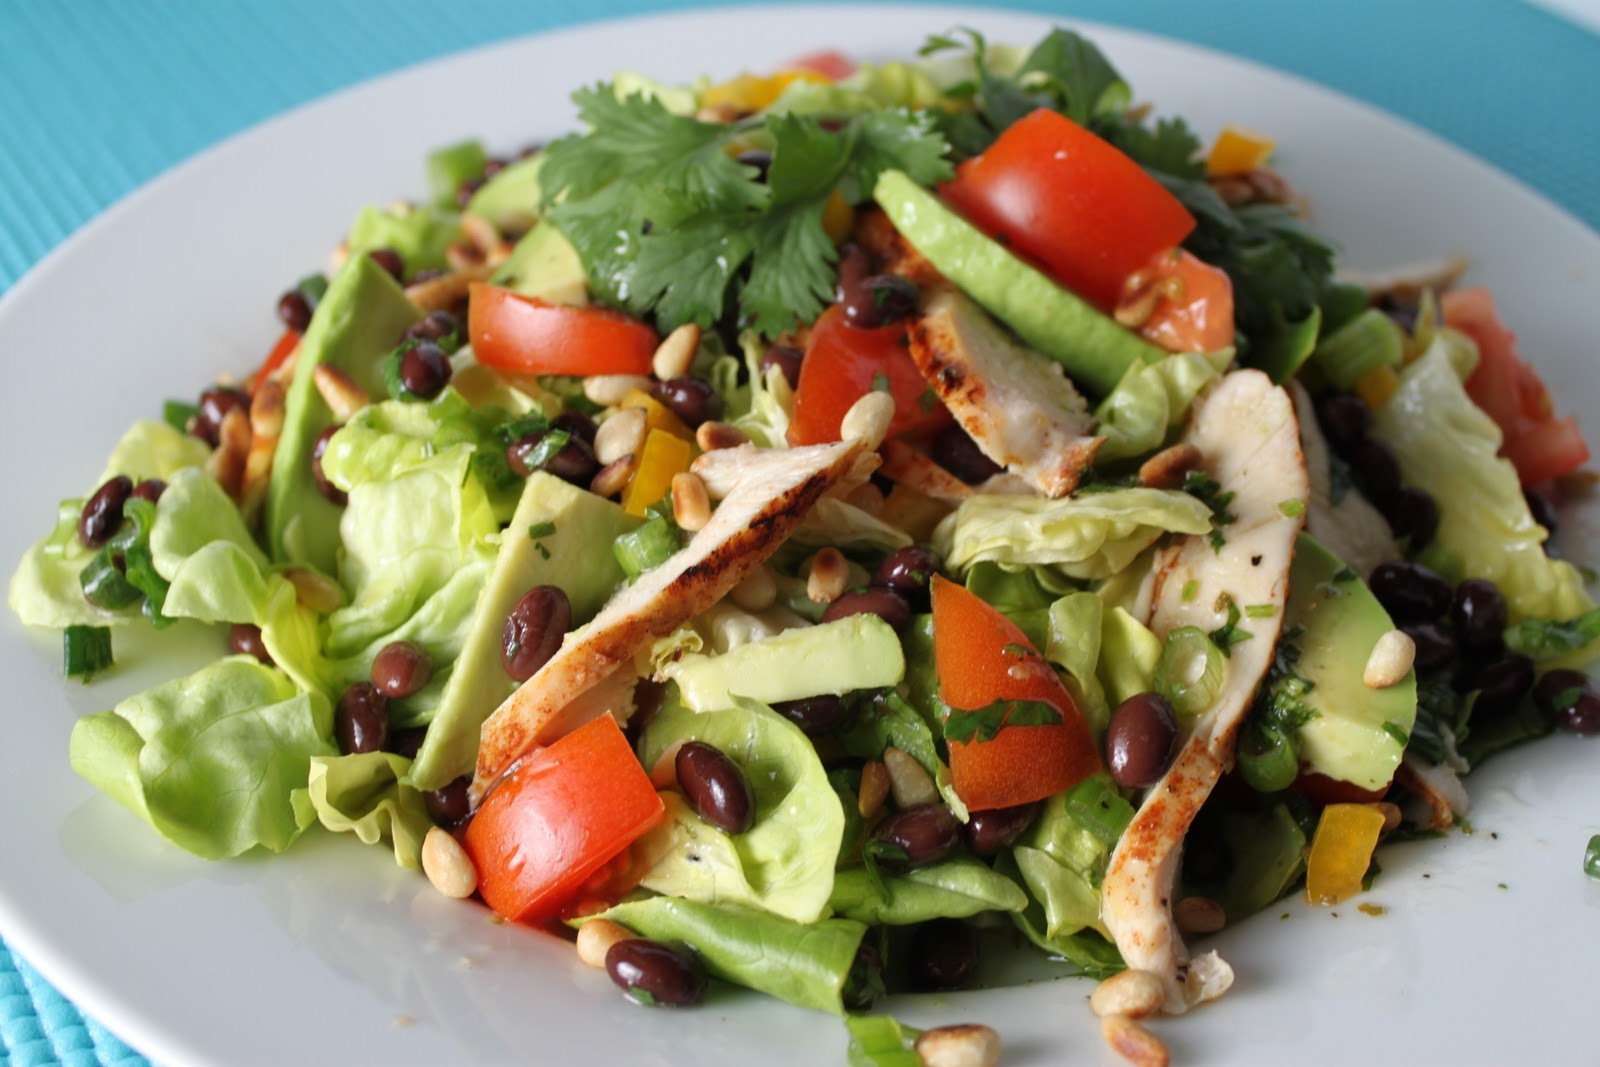 Grilled Chicken Salad Recipe
 Southwestern Grilled Chicken Salad with Tomato and Black